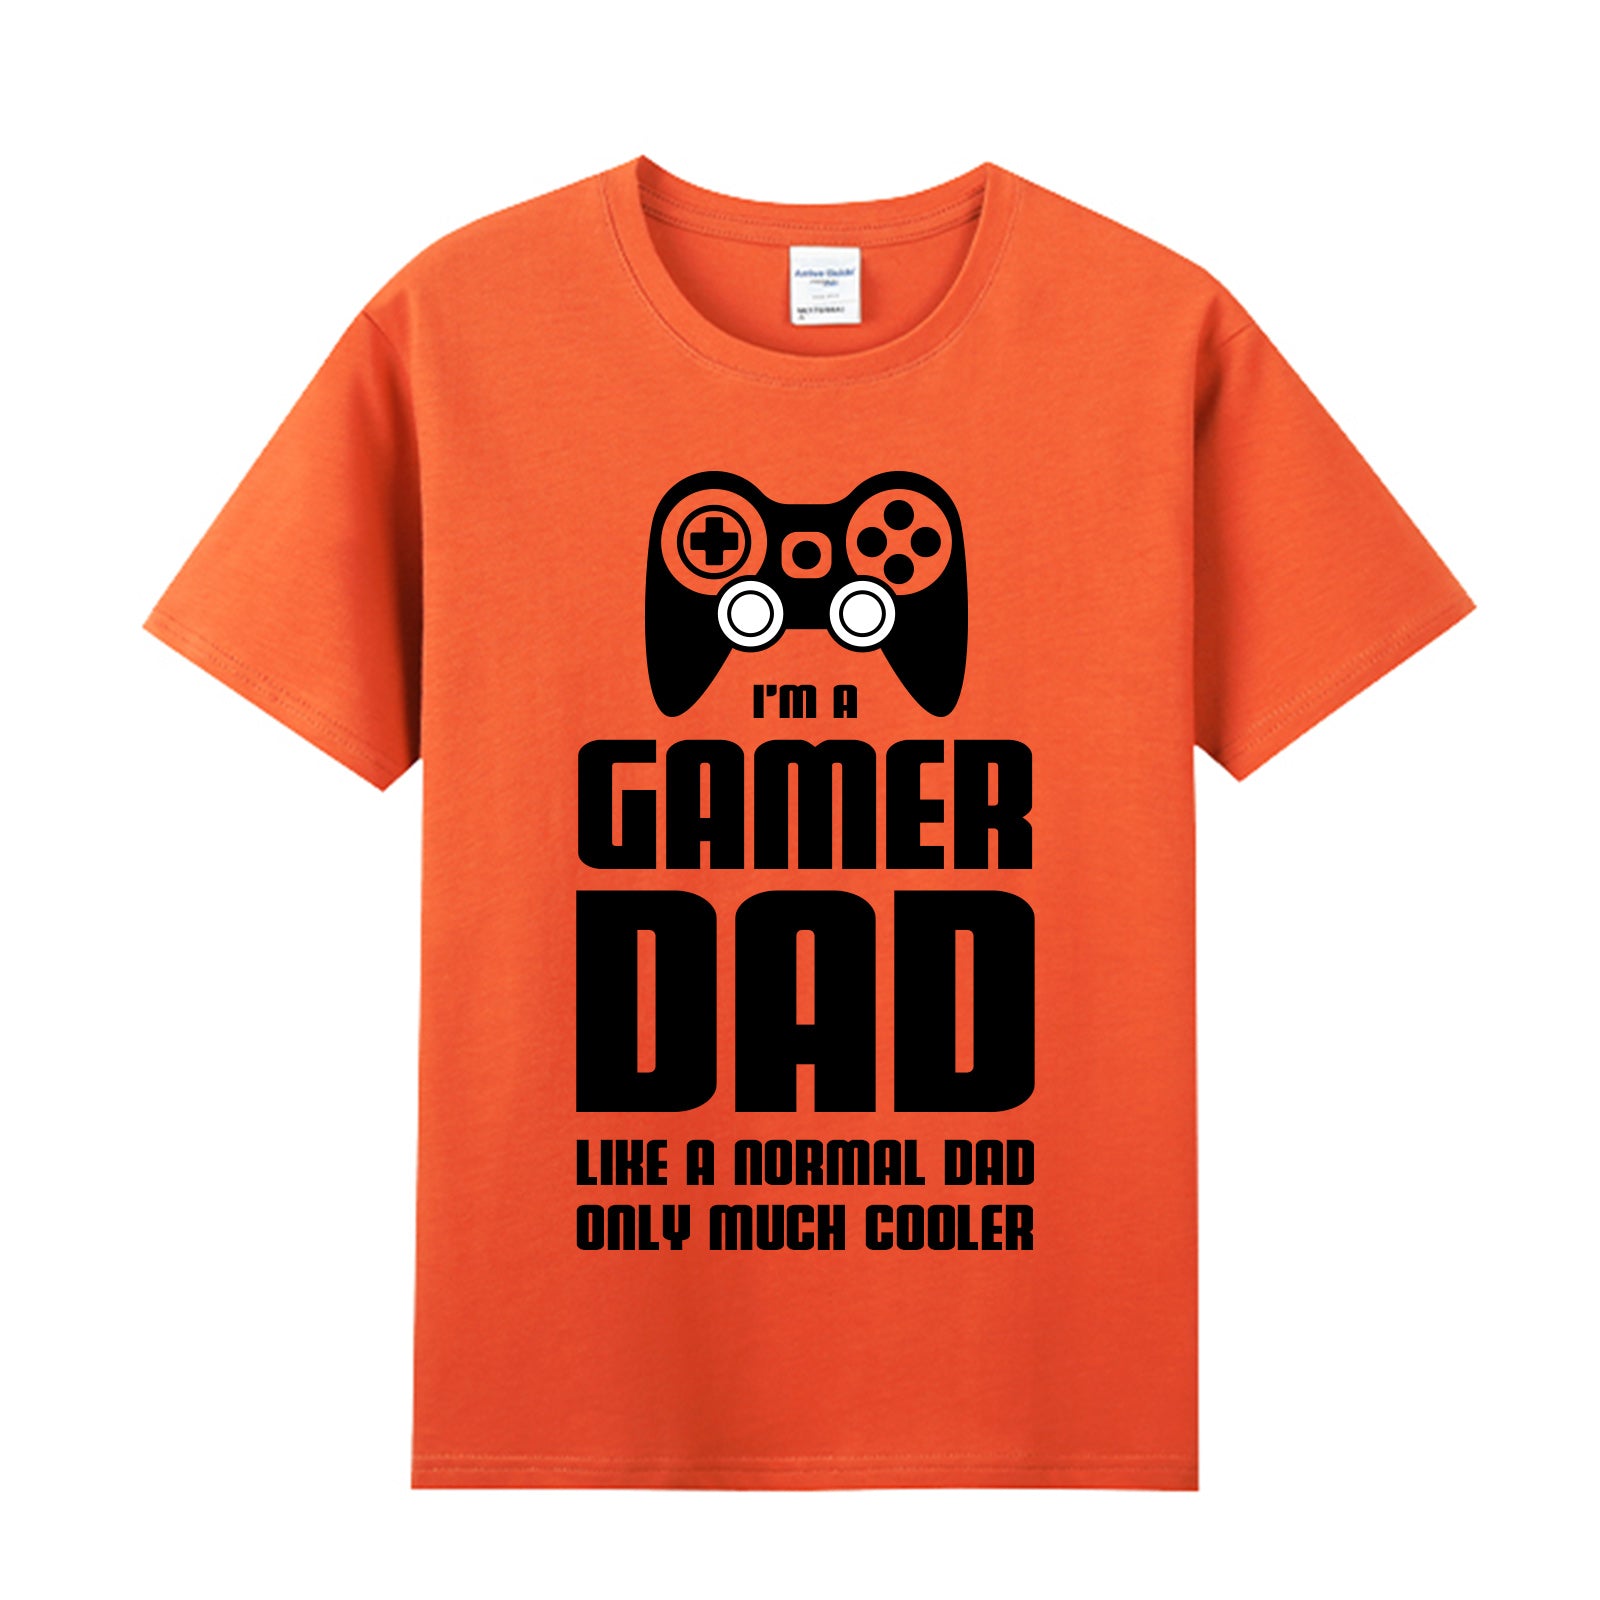 Unisex Funny T-Shirt I'M A GAMER DAD Graphic Novelty Summer Tee